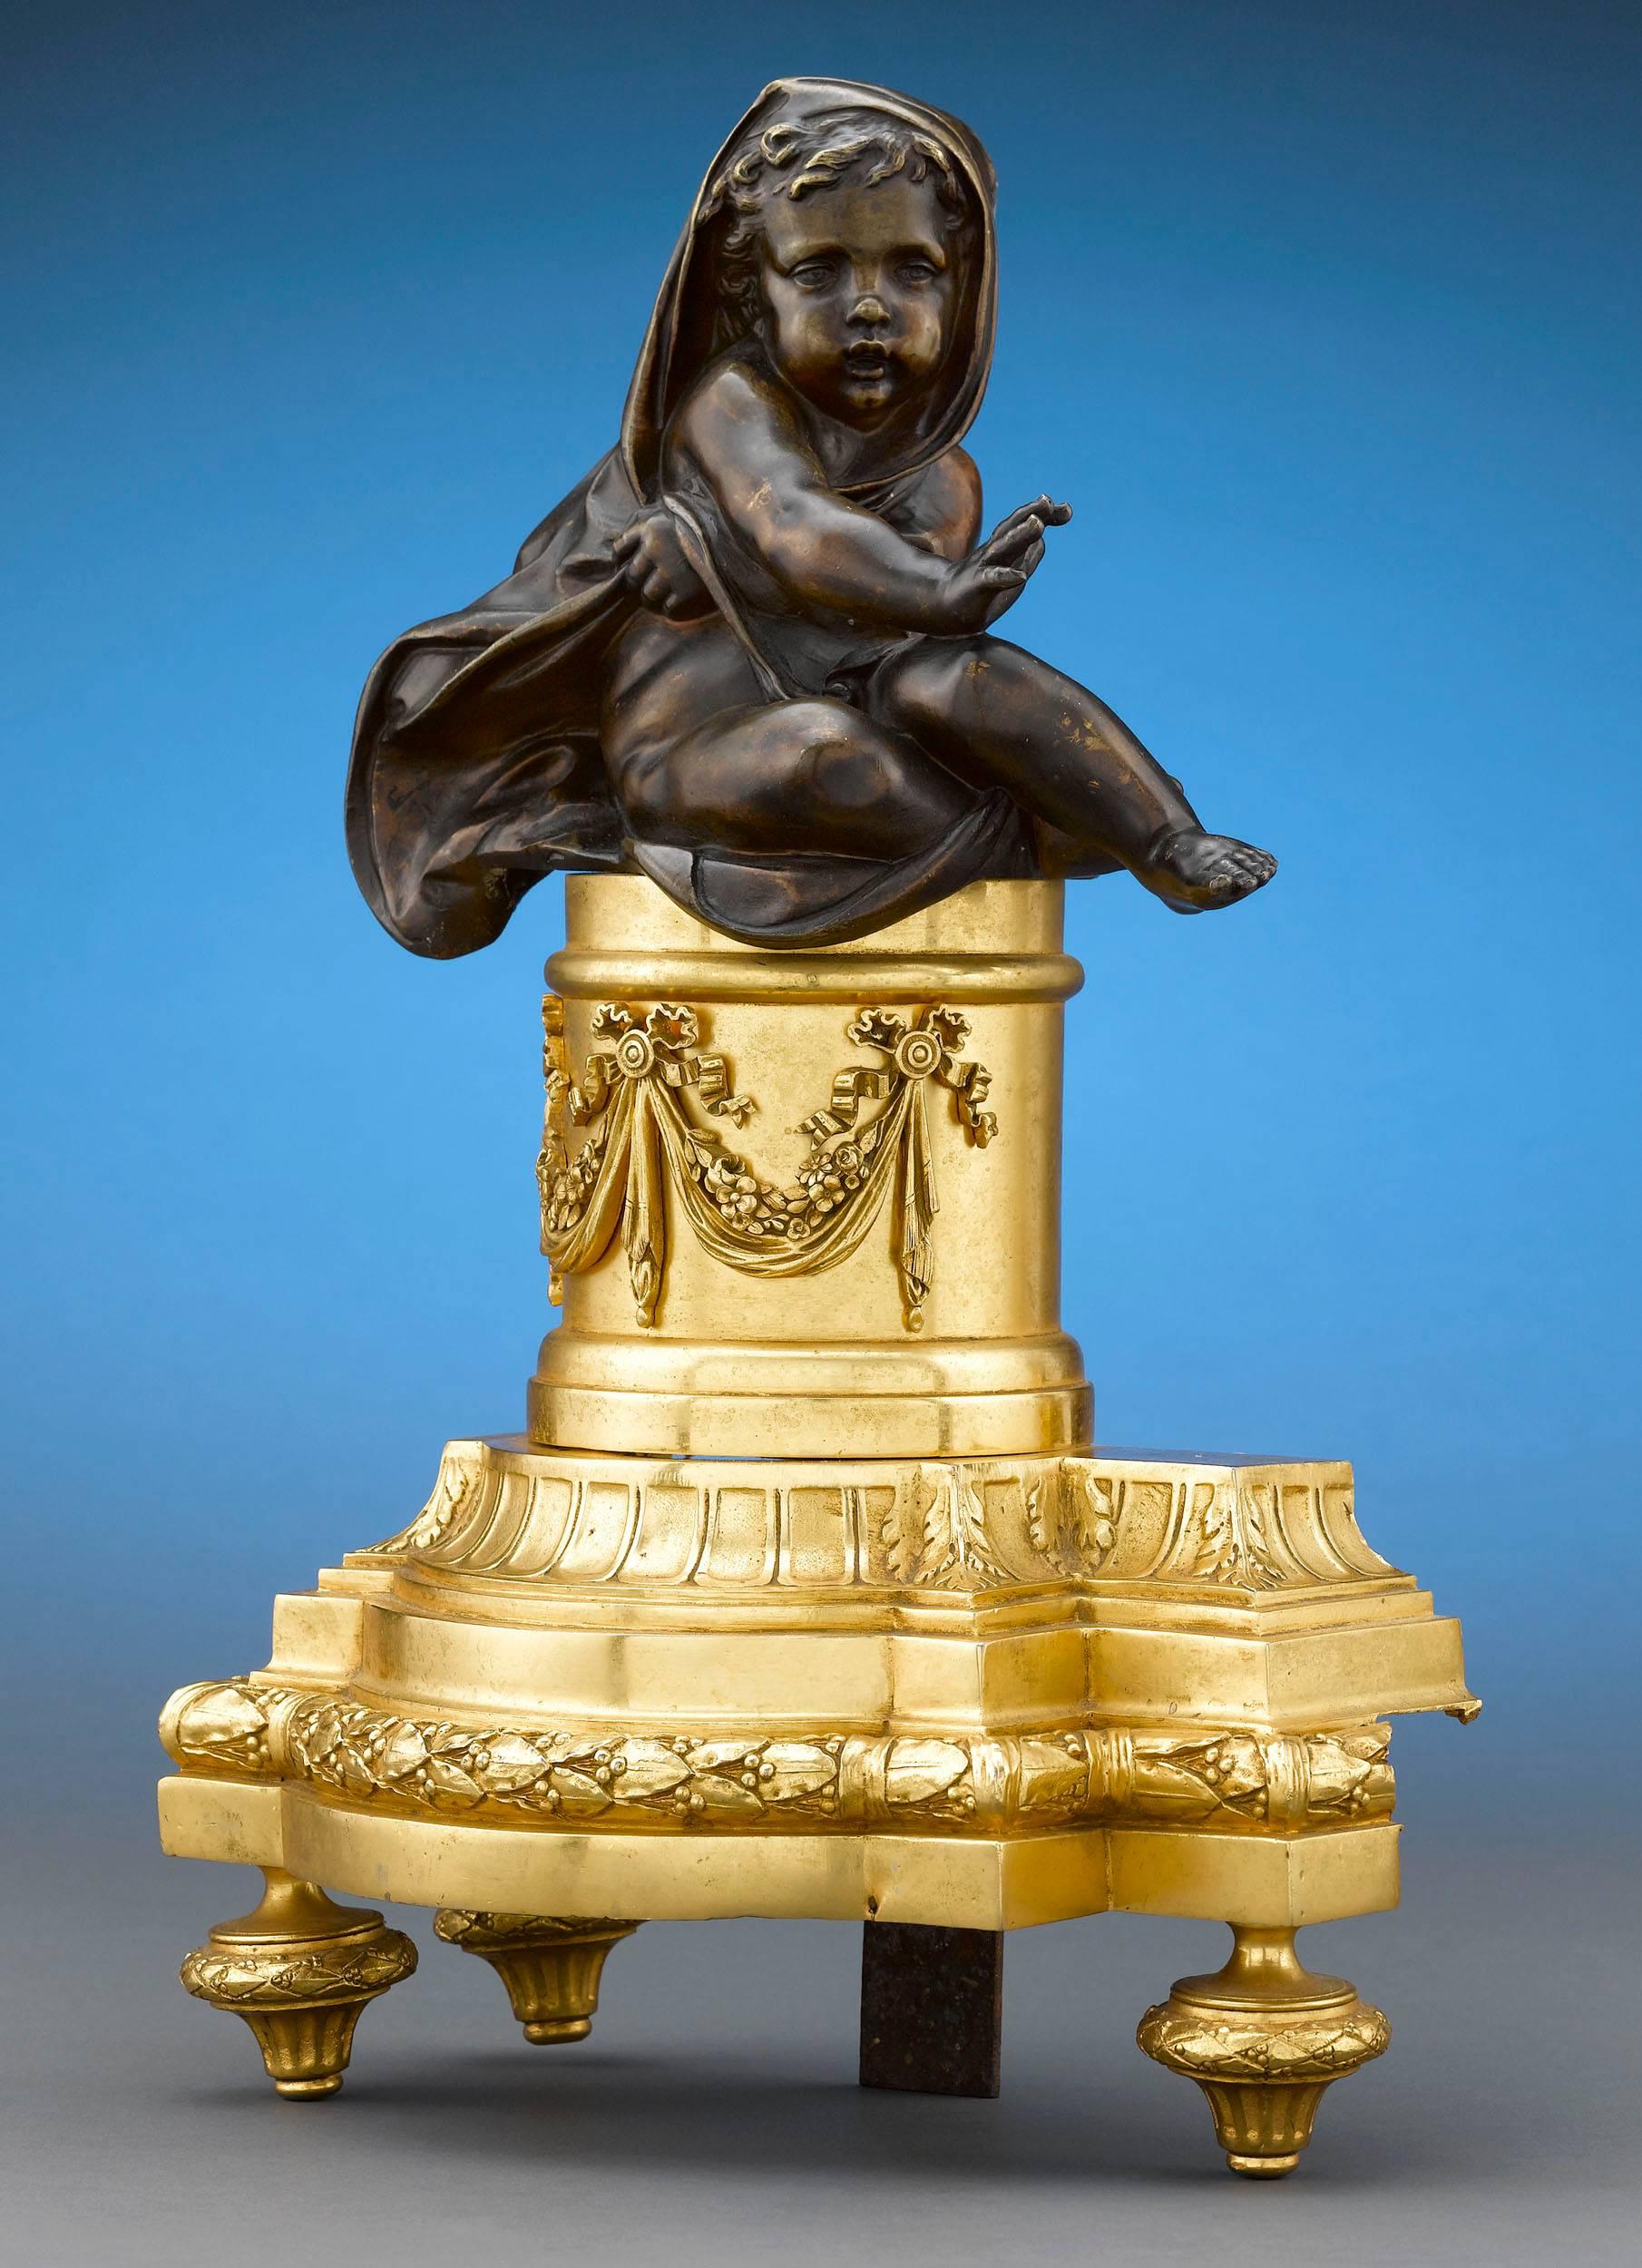 This wonderful pair of Louis XVI-style bronze chenets features patinated, cloaked cherub figures seated on ornate gilt bronze plateau and keeping themselves warm by the fire. Chenets, or andirons, were a staple in well-appointed homes, and were